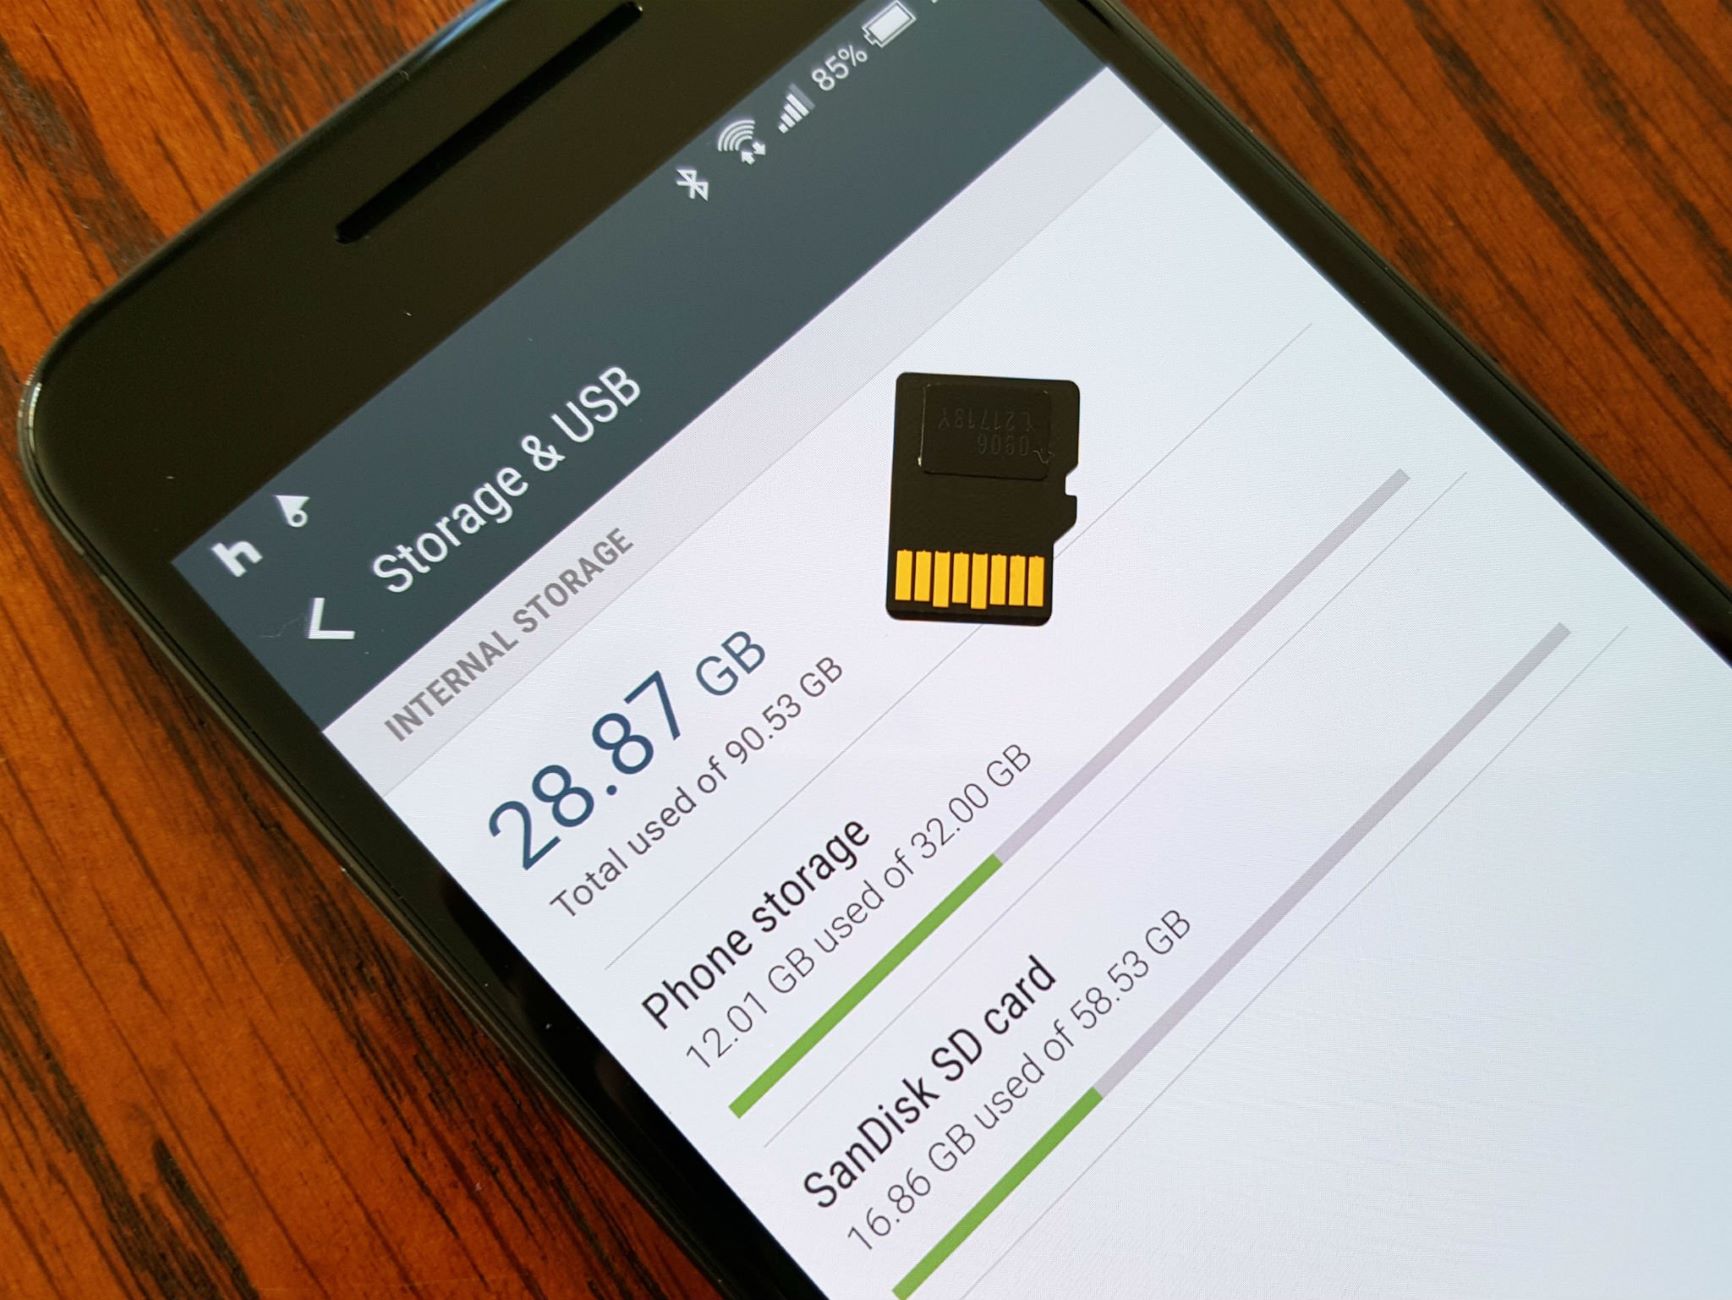 Moving Phone Storage To An SD Card